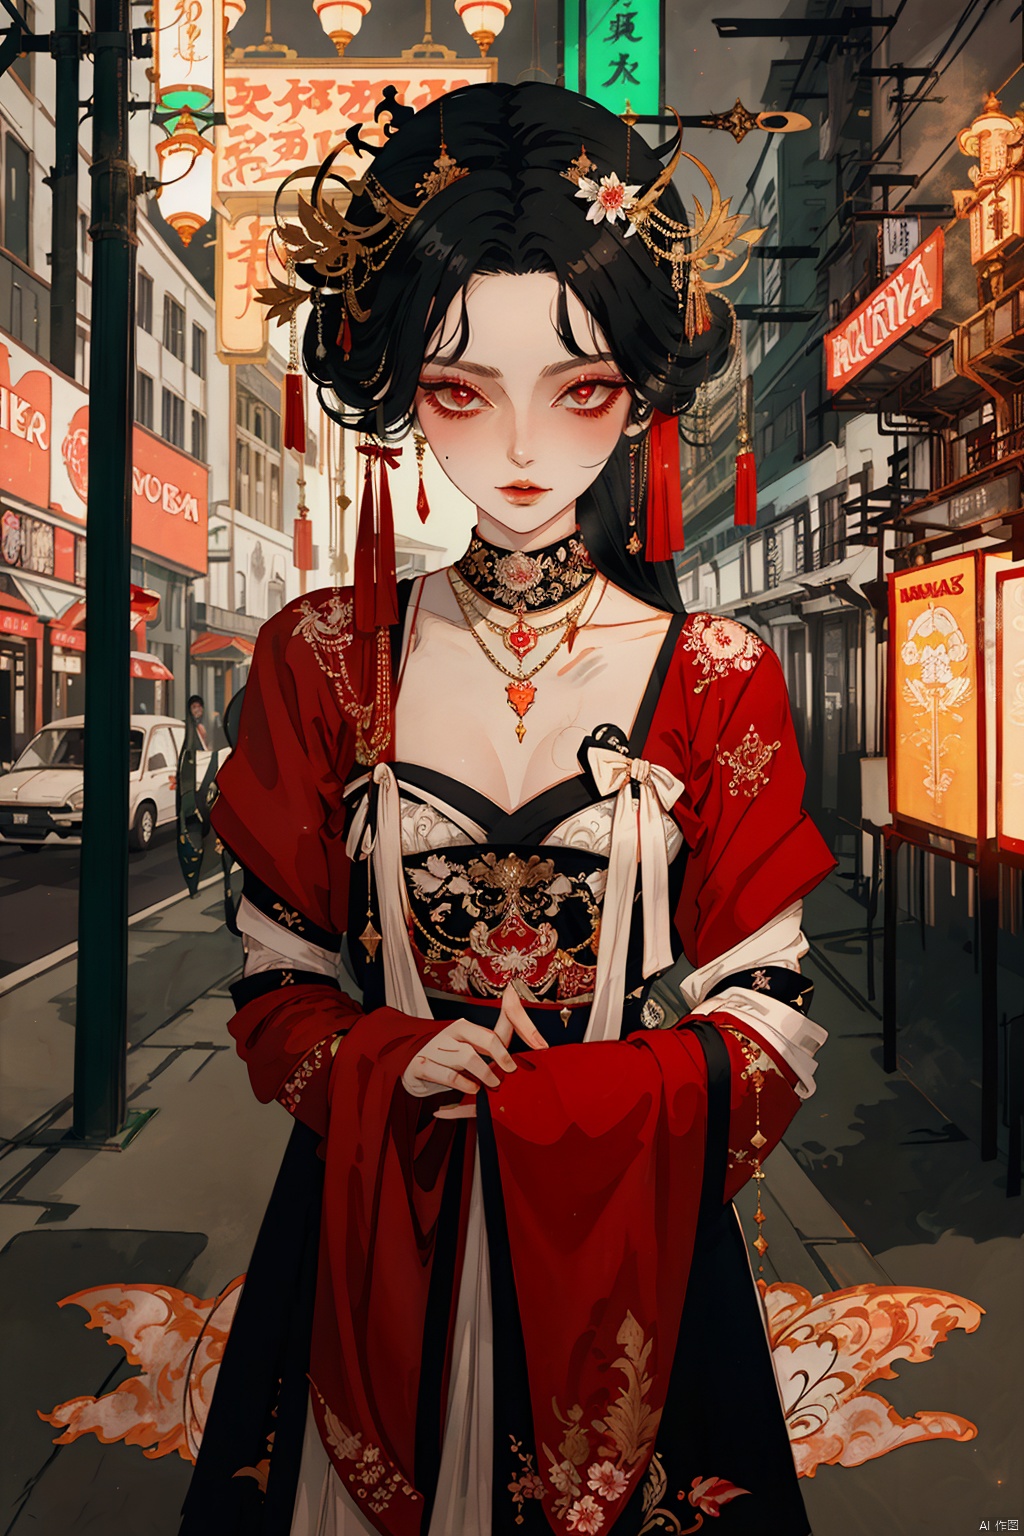  A sultry femme fatale in a form-fitting crimson gown, the rich fabric clinging to her curves as she stands in a dimly lit alley bathed in the glow of neon signs. Her smoky gaze carries a hint of danger and intrigue, as she embodies the allure of mystery and seduction in a gritty urban setting., yunv